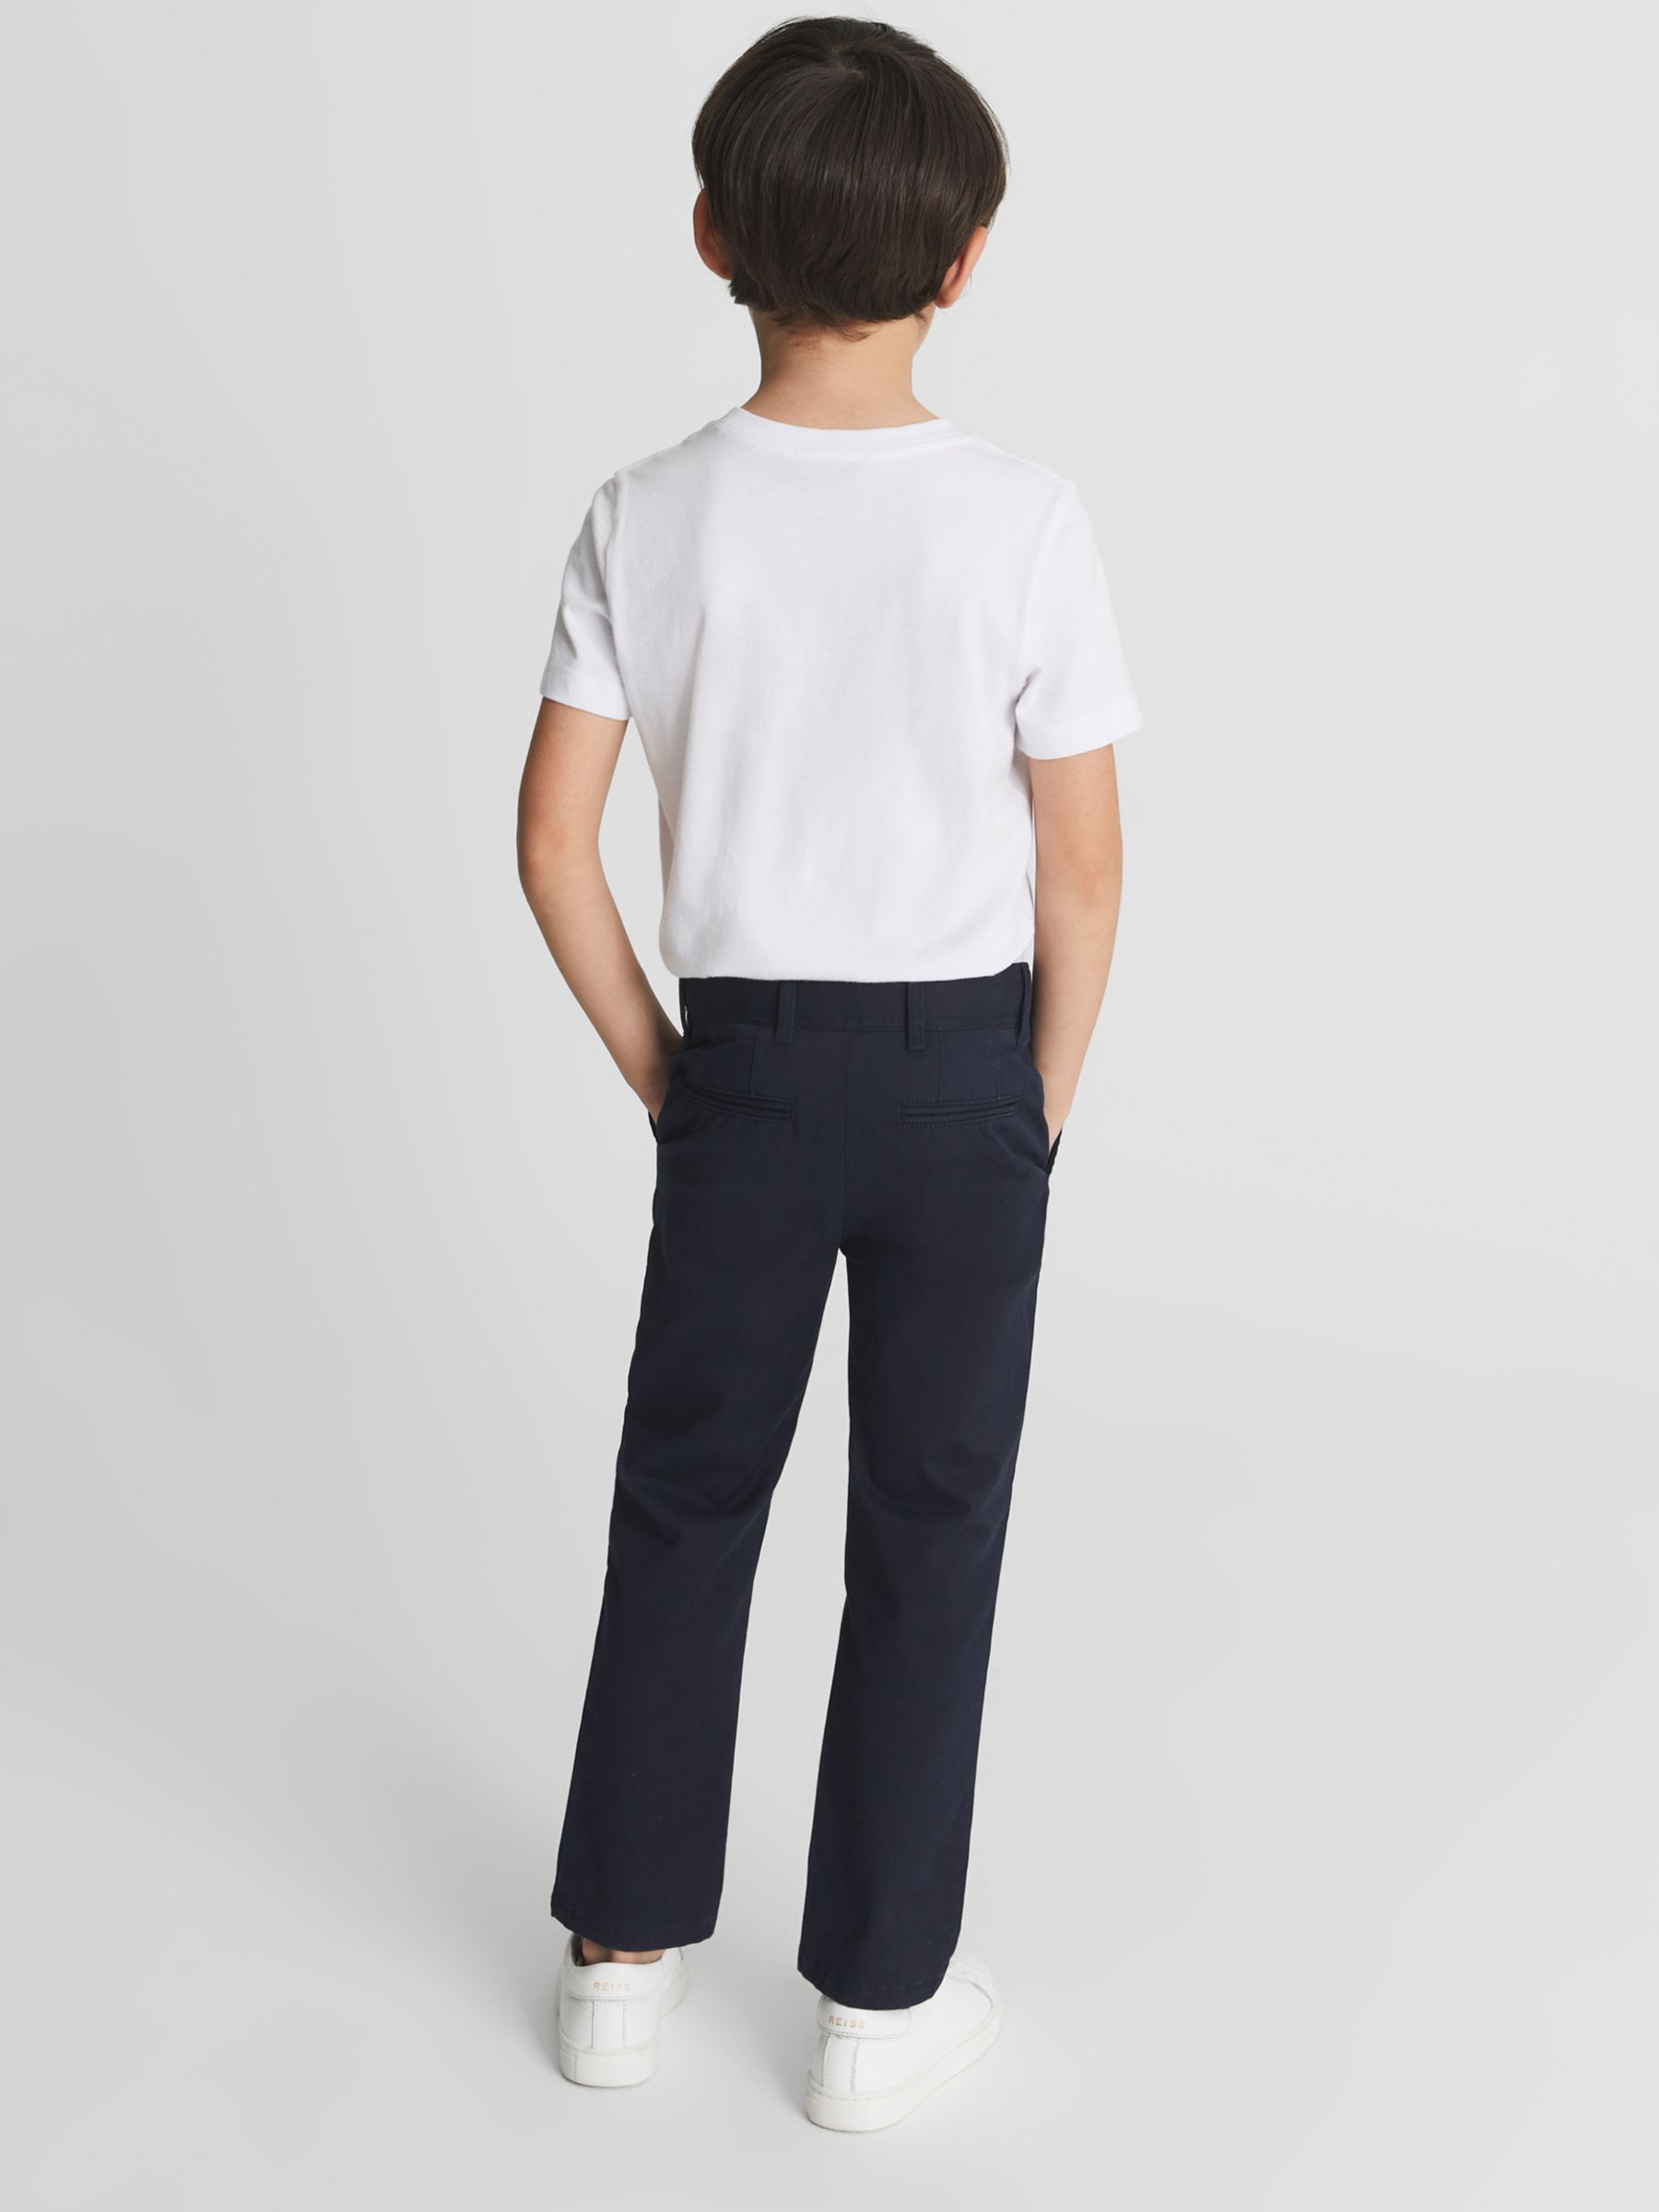 Reiss Kids' Pitch Slim Fit Chino Trousers, Navy, 4-5 years